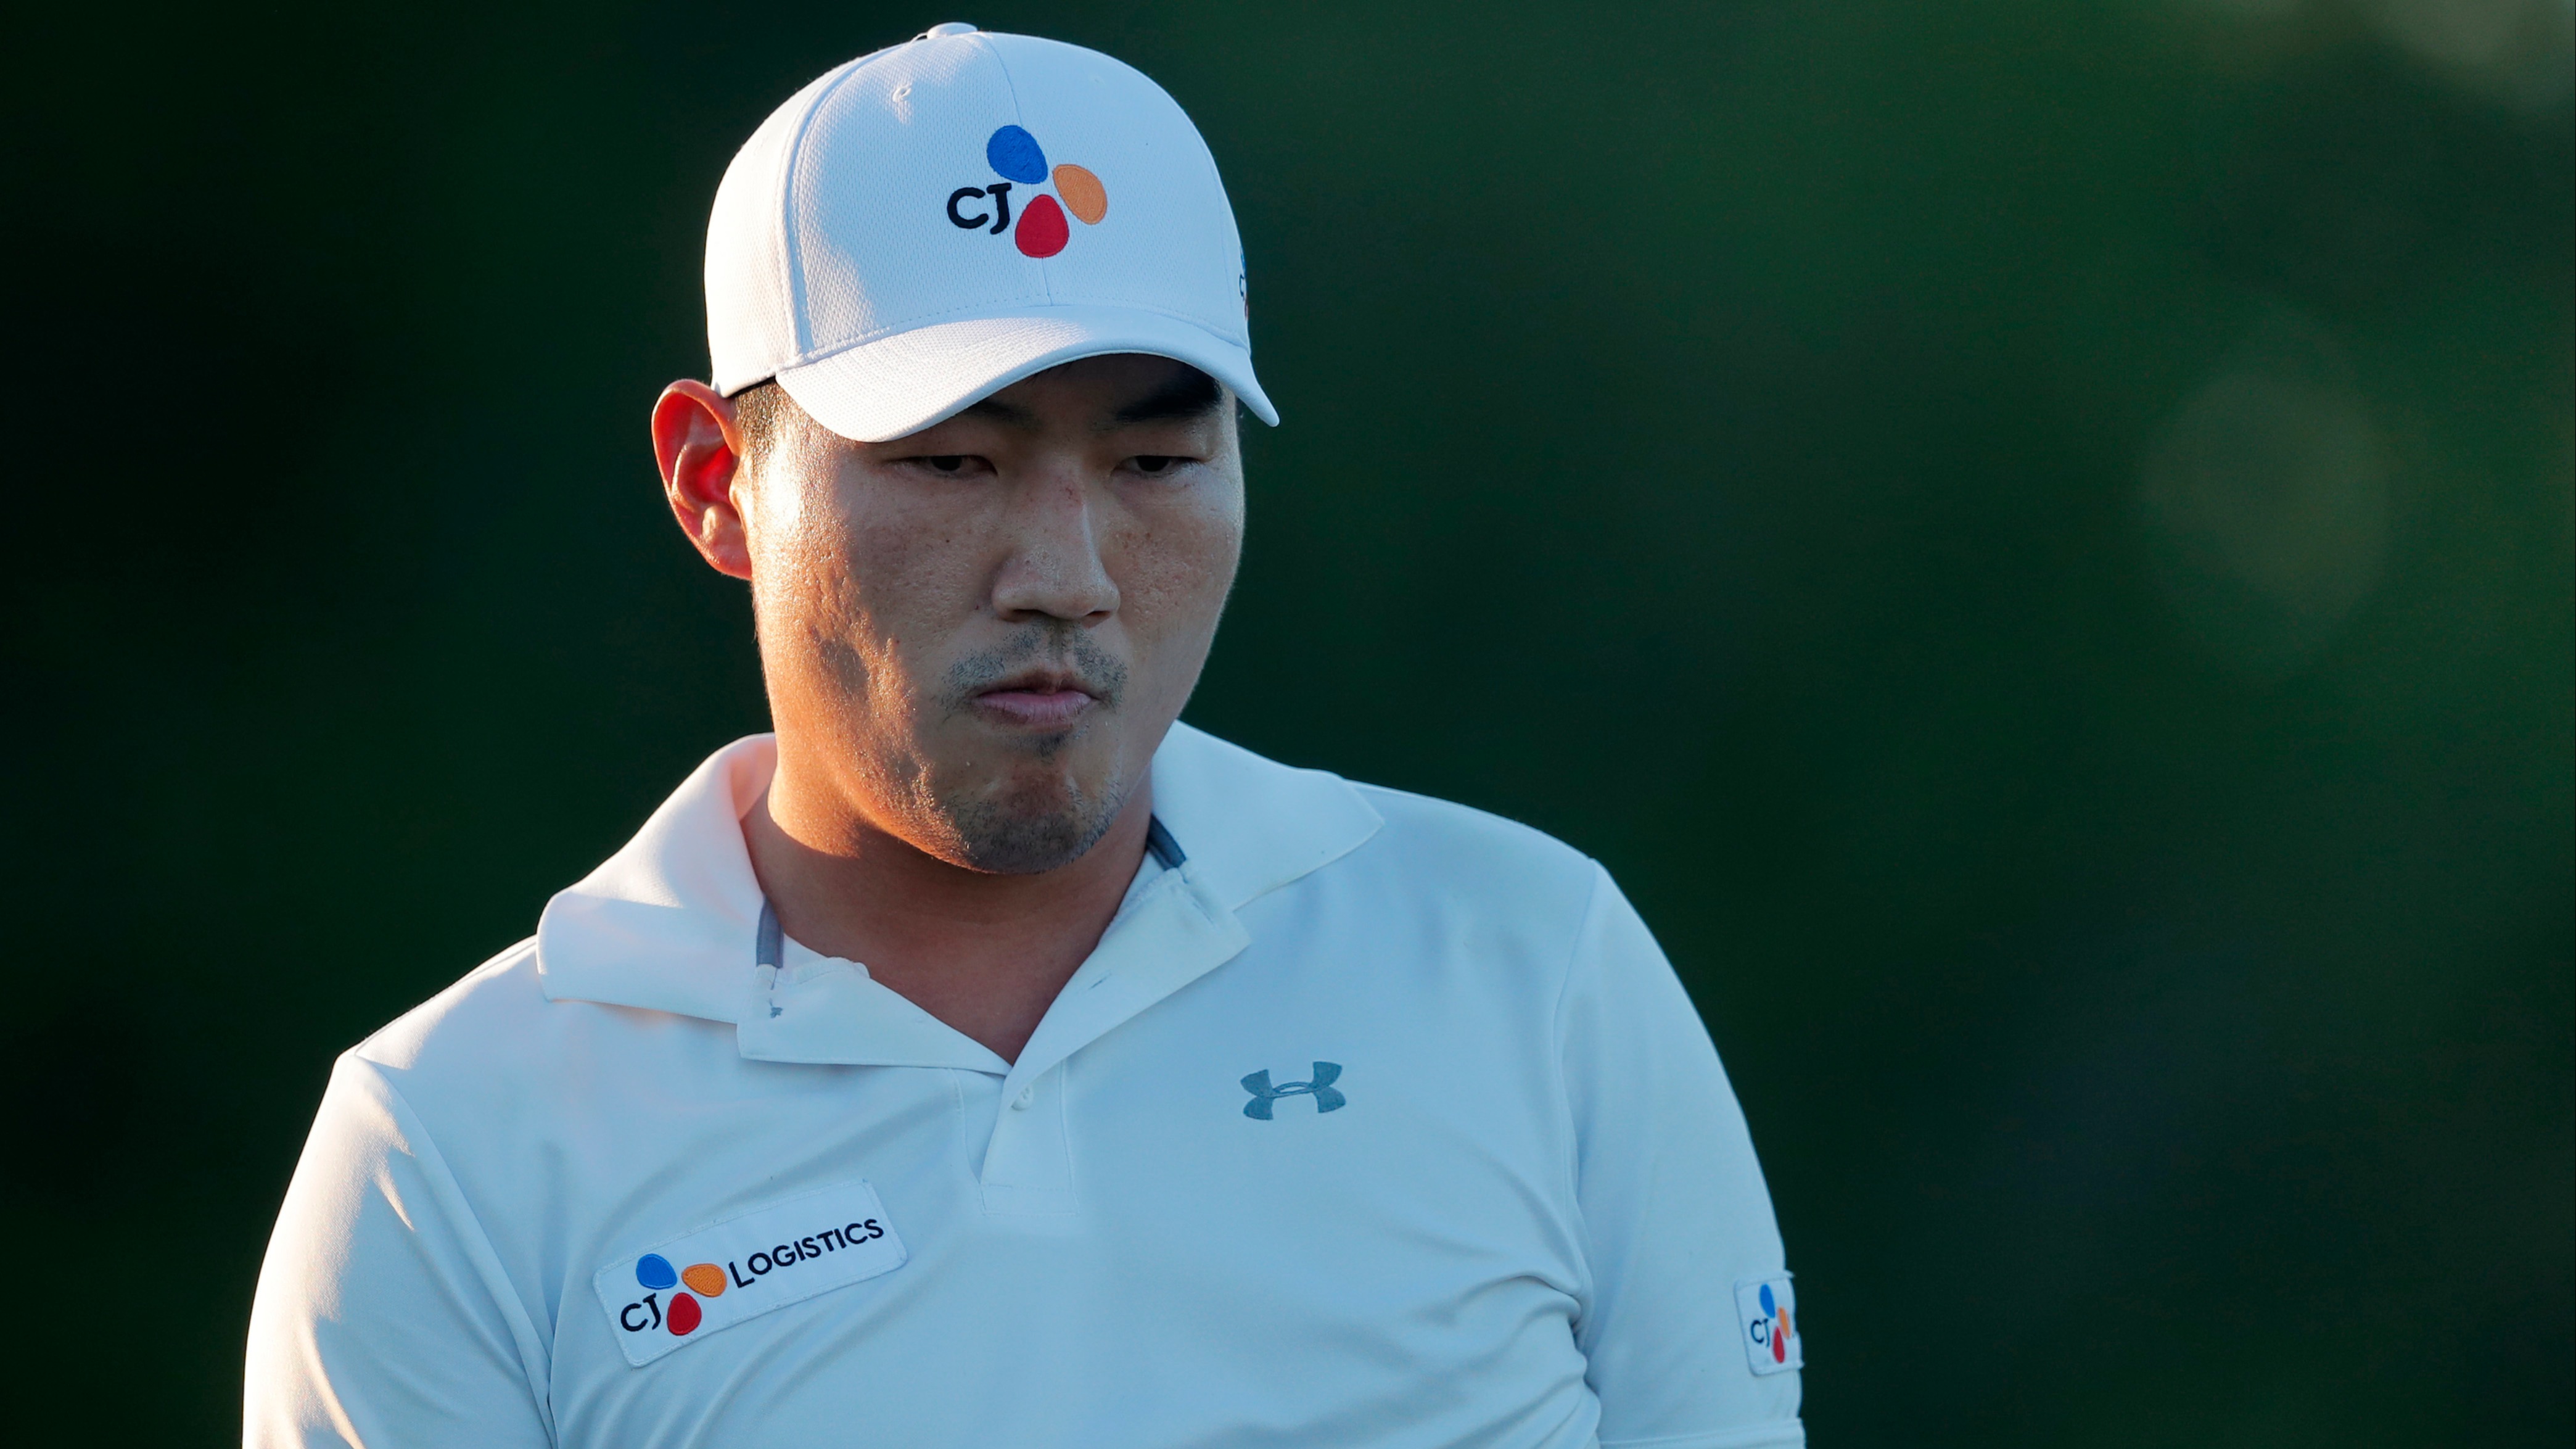 Byron Nelson updated odds Sung Kang's course record shoots him up